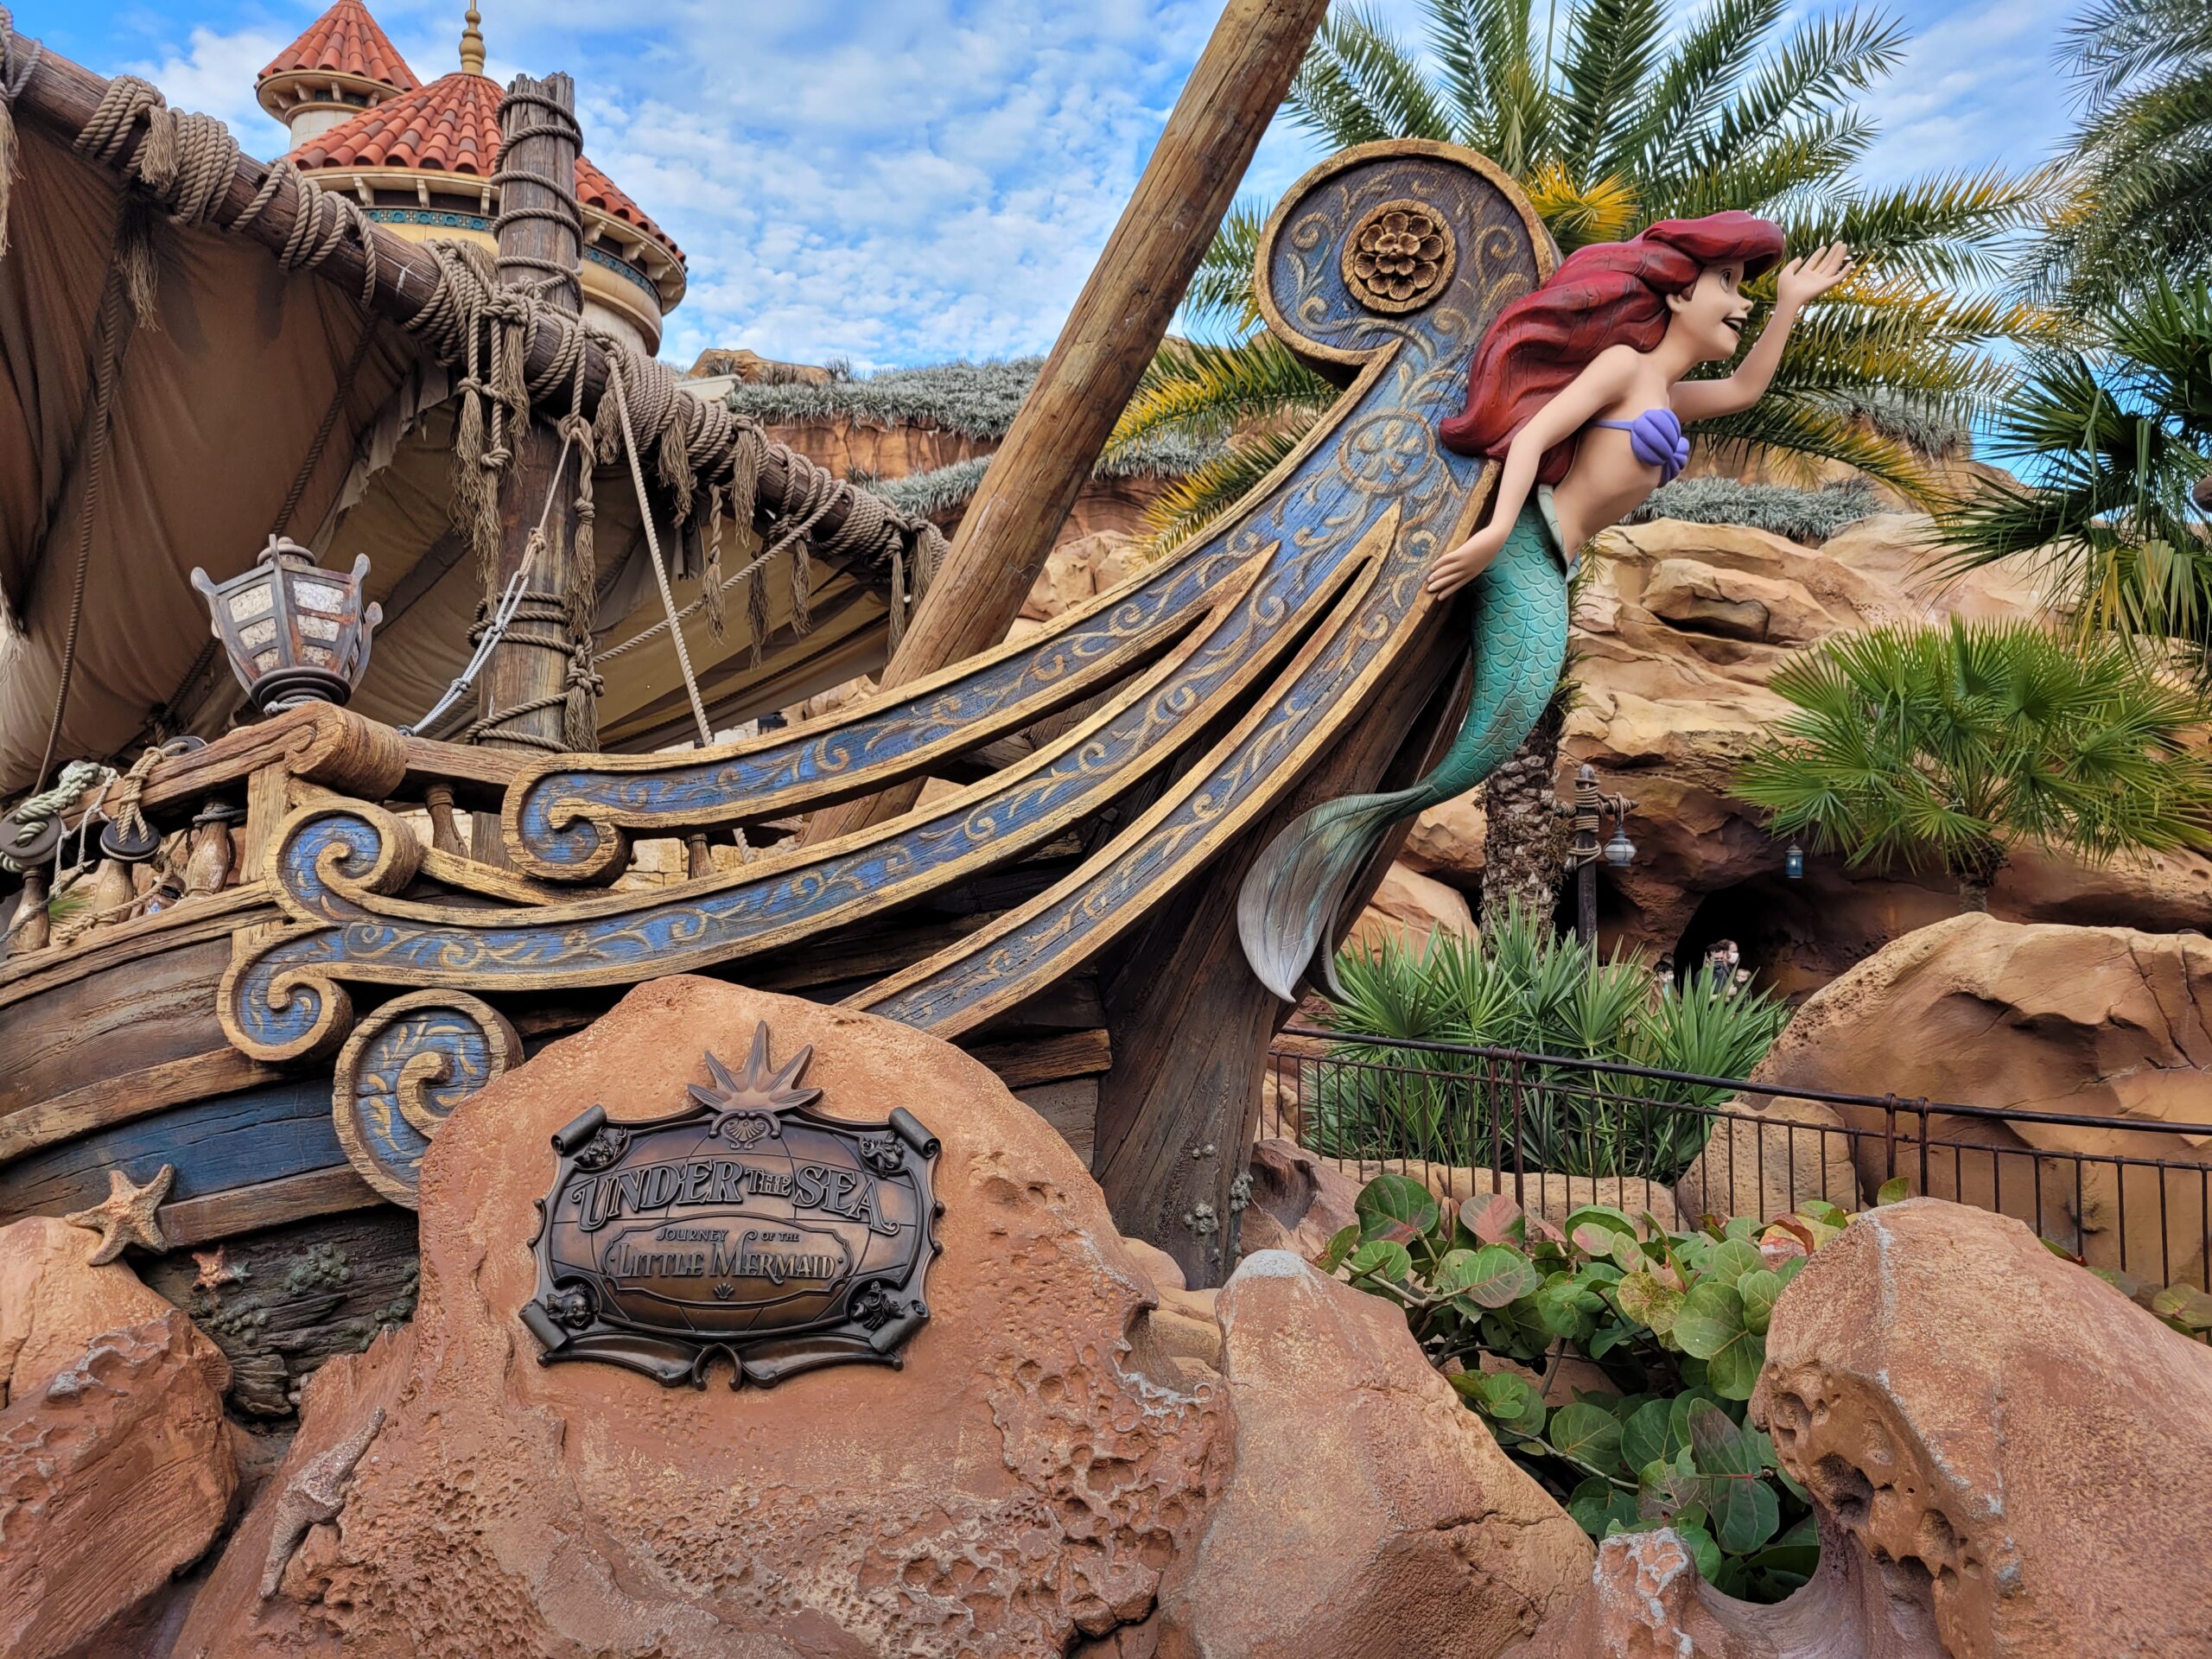 Under The Sea - Journey of the Little Mermaid Attraction at Magic Kingdom